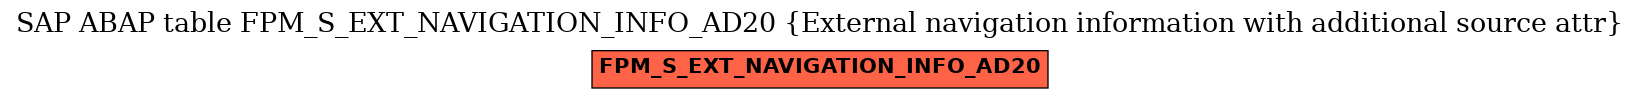 E-R Diagram for table FPM_S_EXT_NAVIGATION_INFO_AD20 (External navigation information with additional source attr)